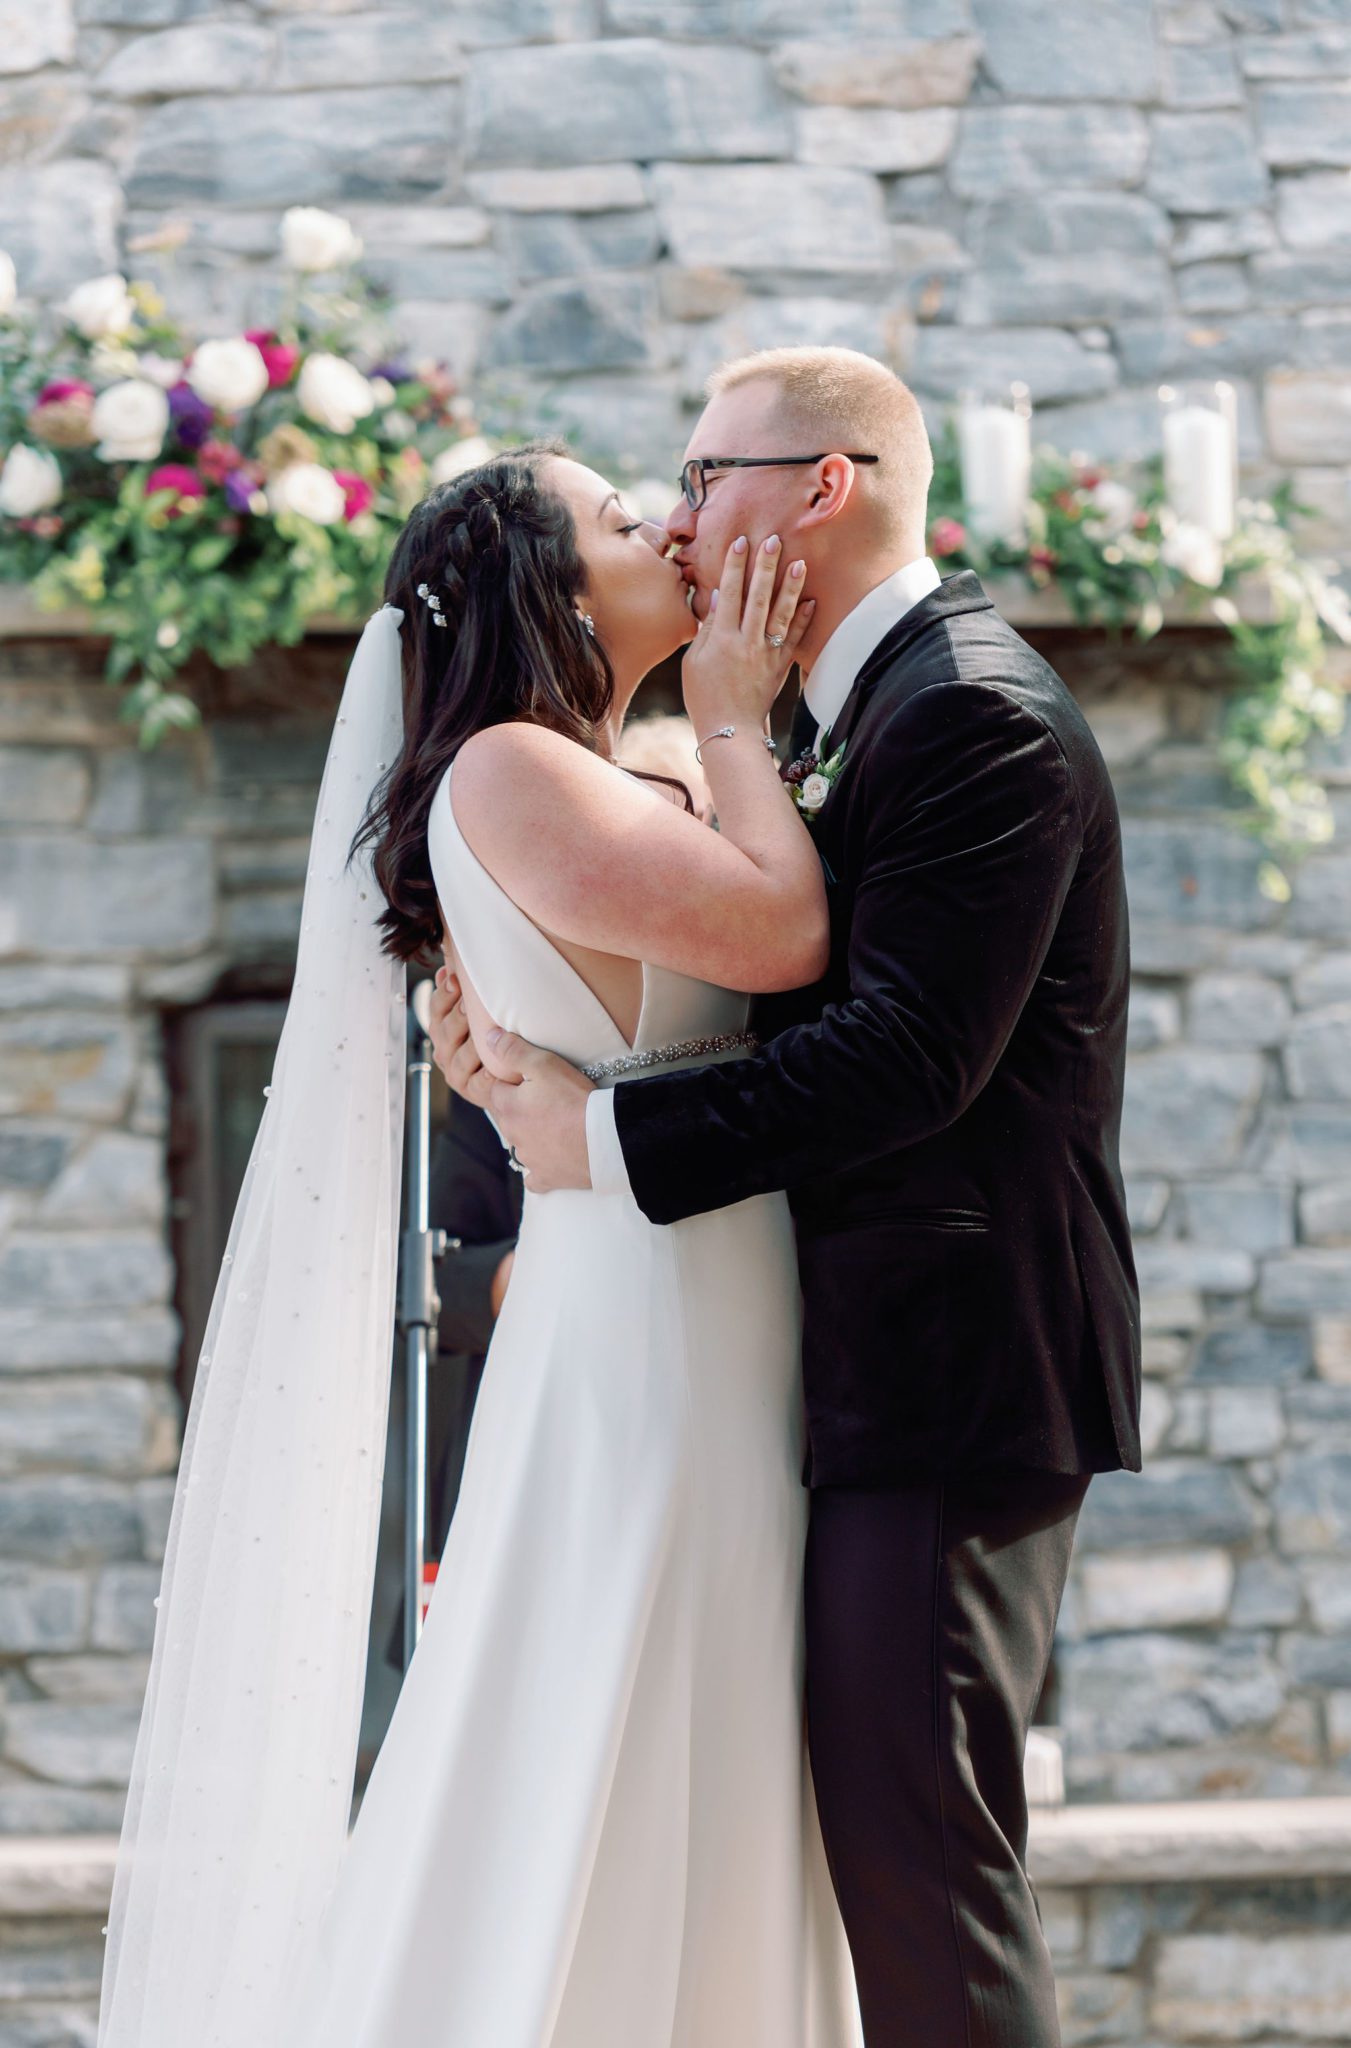 wedding first kiss at outdoor venue